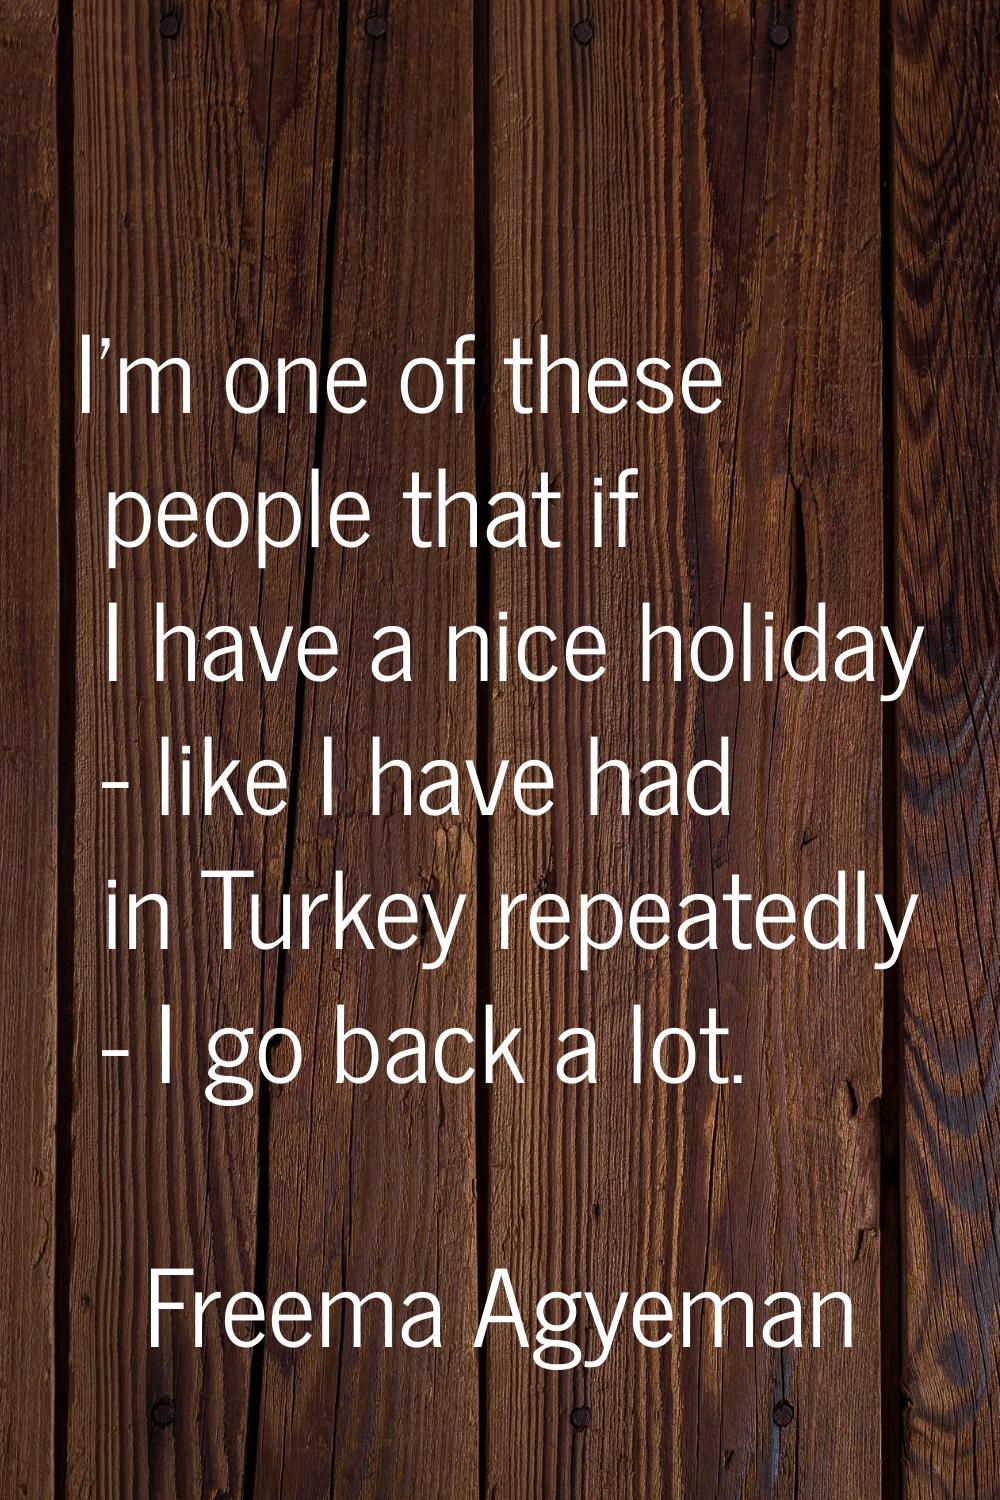 I'm one of these people that if I have a nice holiday - like I have had in Turkey repeatedly - I go